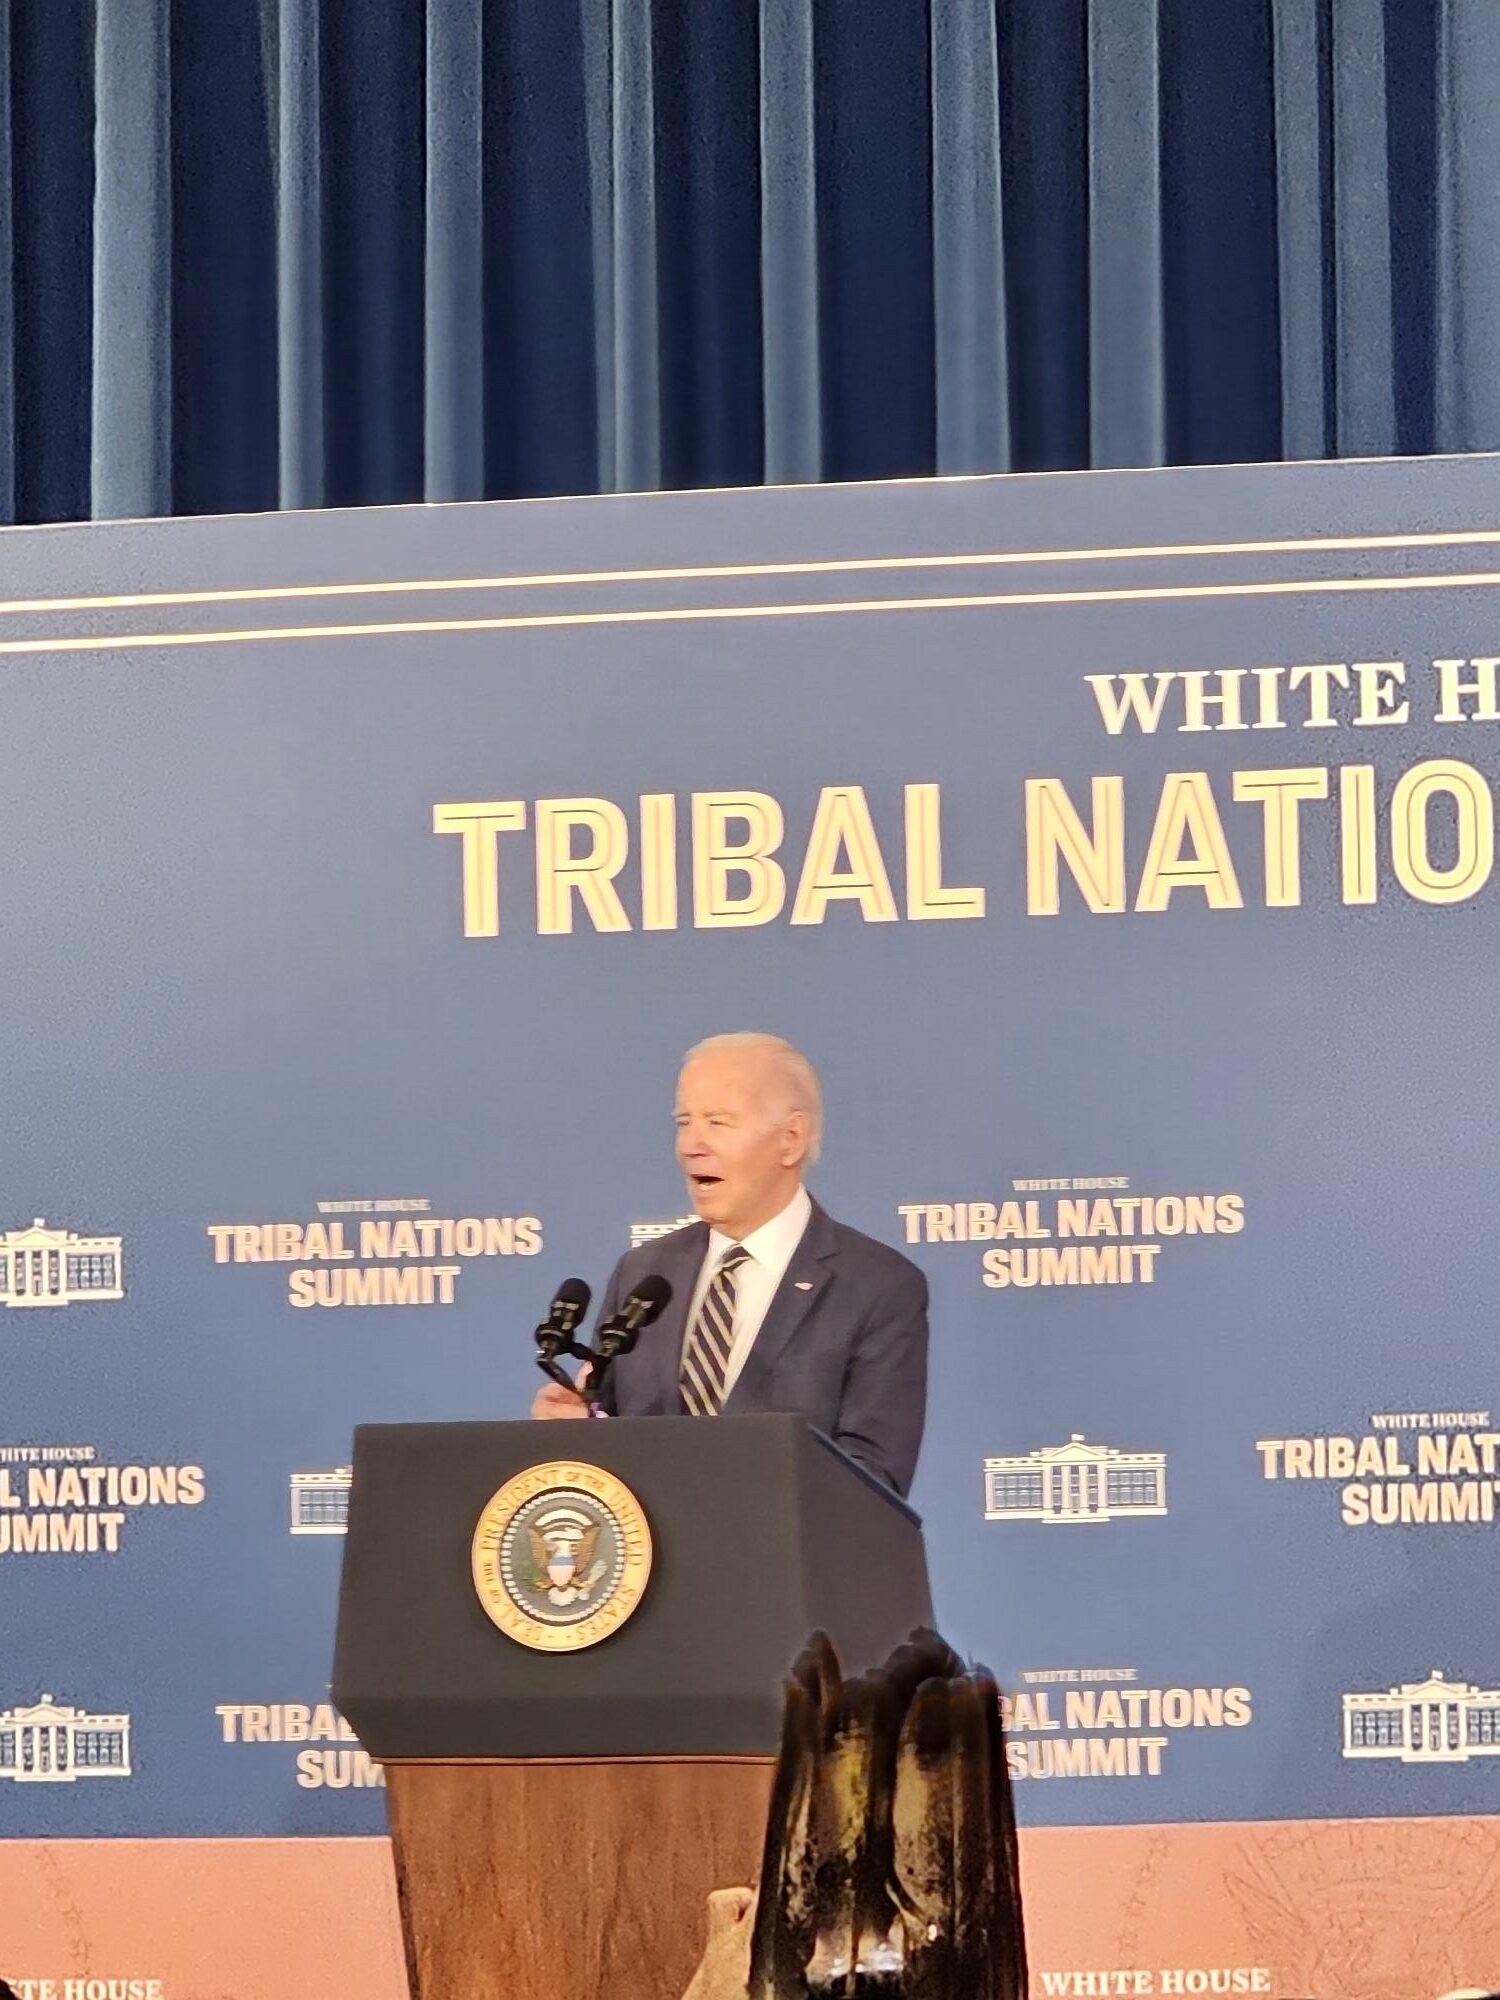 Klamath Tribes Chairman attends White House Tribal Nations Summit